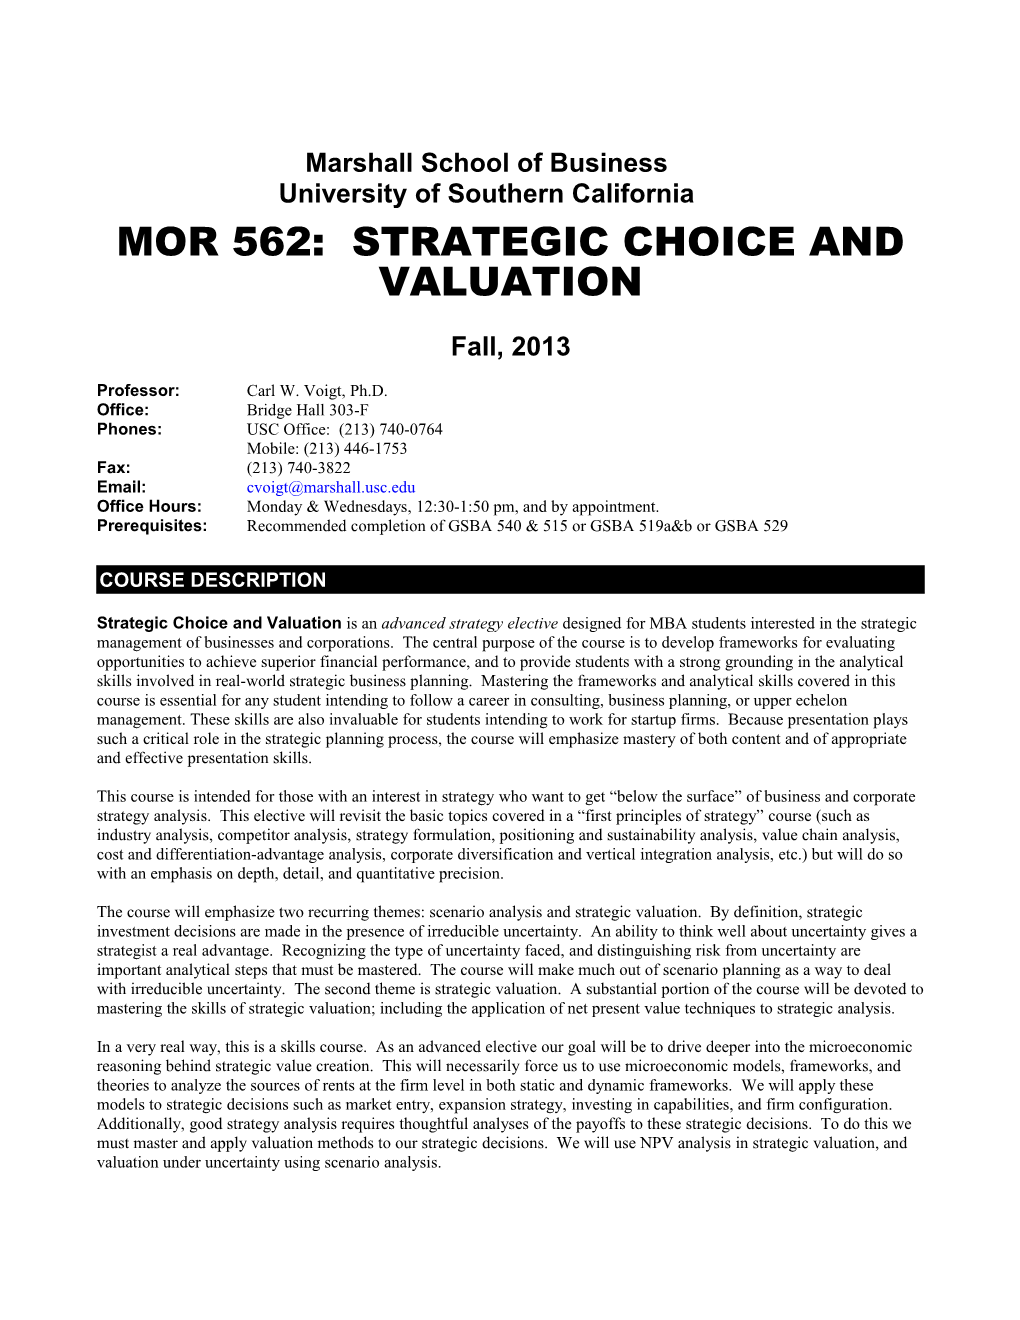 Mor 562: Strategic Choice and Valuation